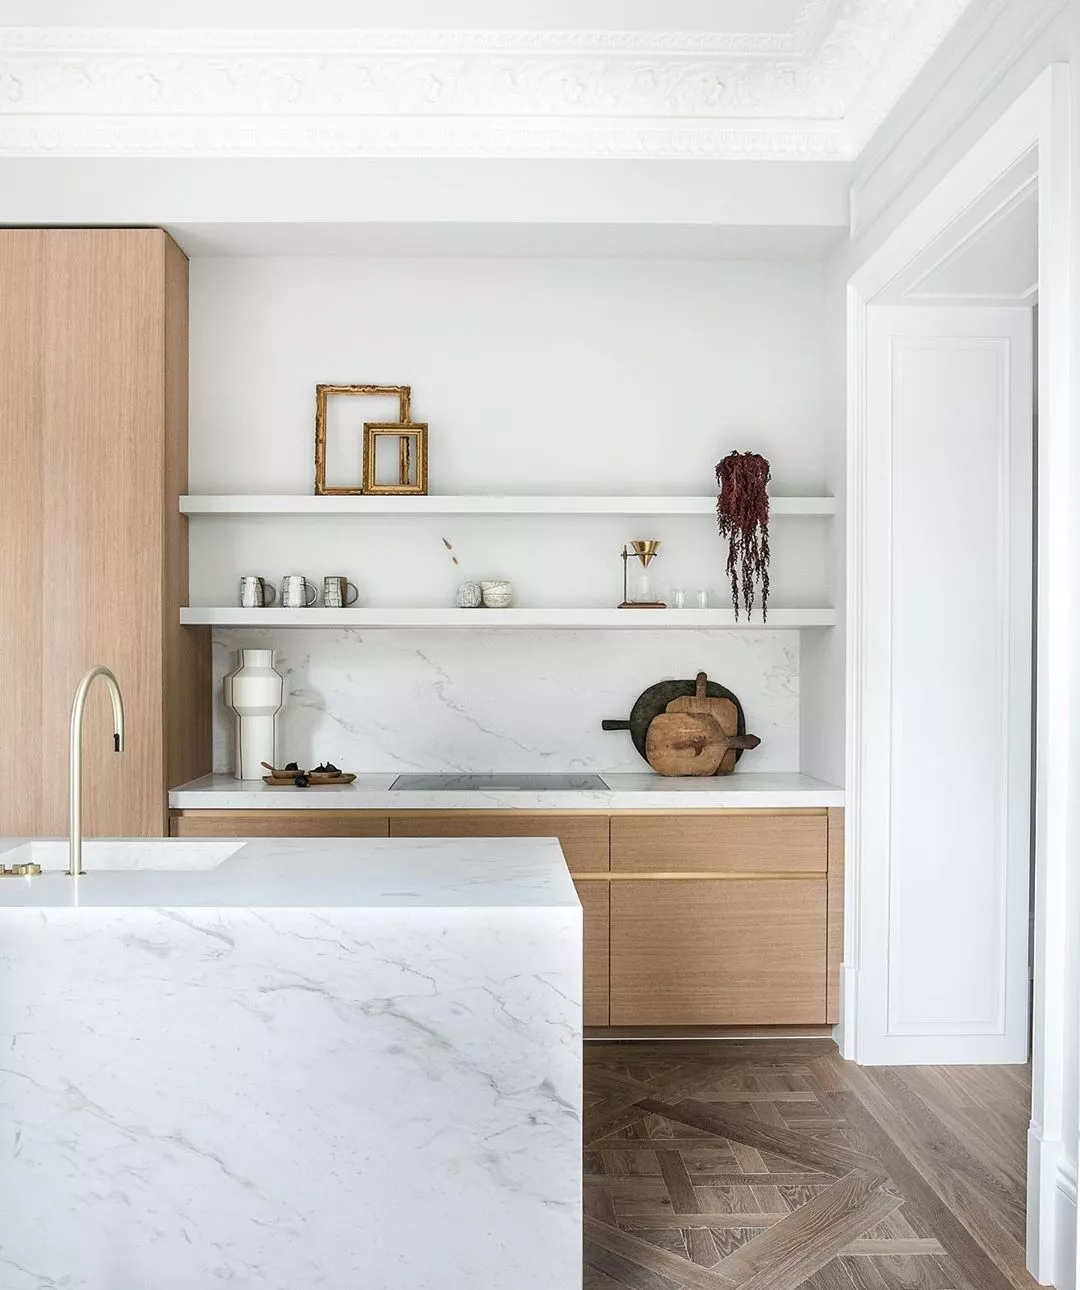 Design a Minimalist Kitchen with These 20 Ideas   Extra Space Storage